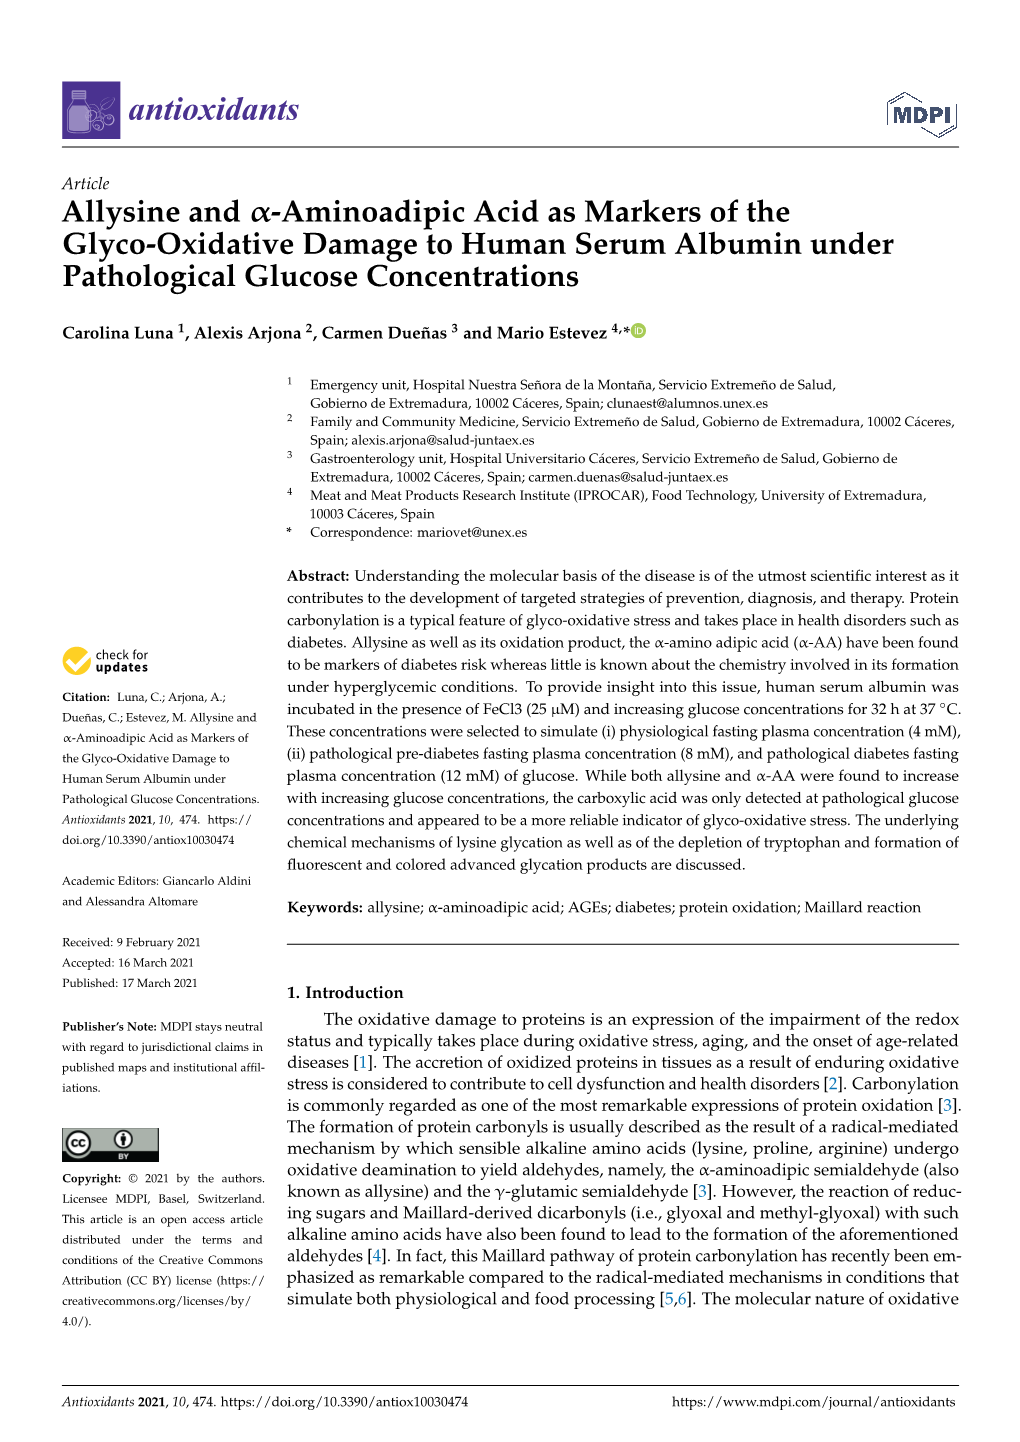 Allysine and Α-Aminoadipic Acid As Markers of the Glyco-Oxidative Damage to Human Serum Albumin Under Pathological Glucose Concentrations